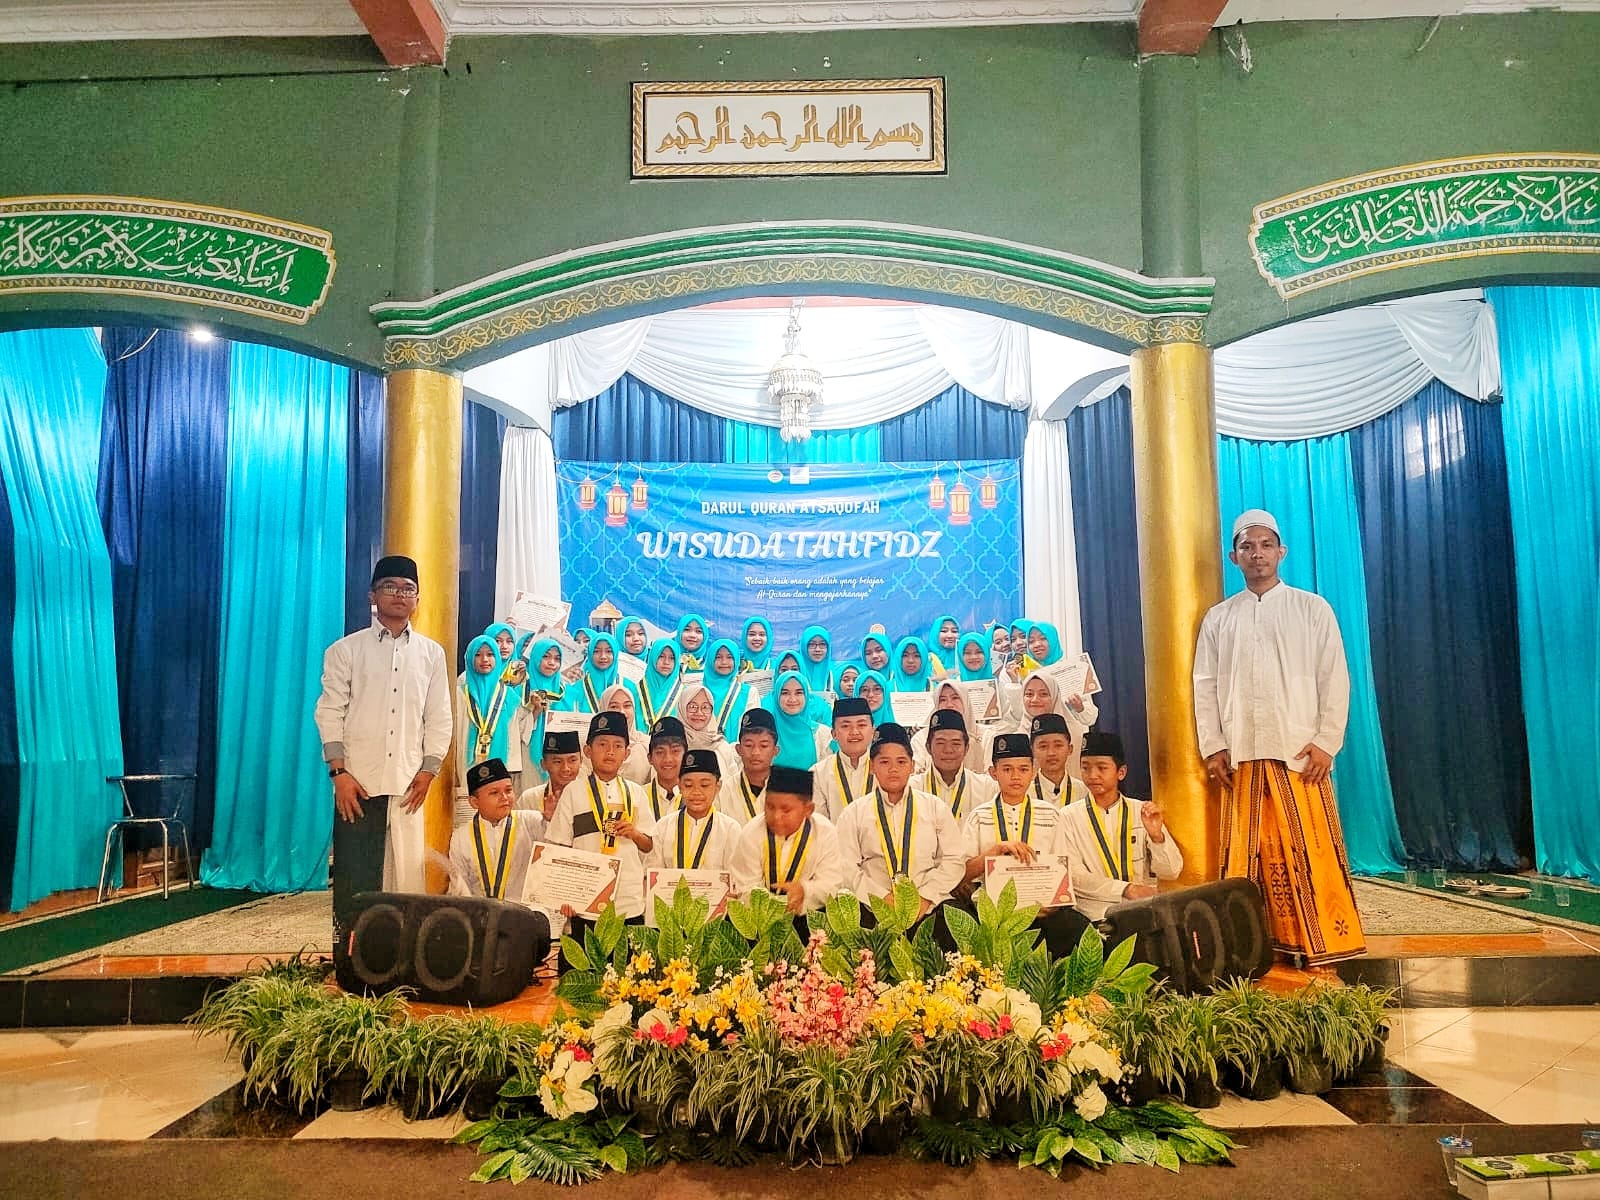 Imam Hussain Shrine honors over (100) of its distinguished students in Indonesia who memorized the Quran